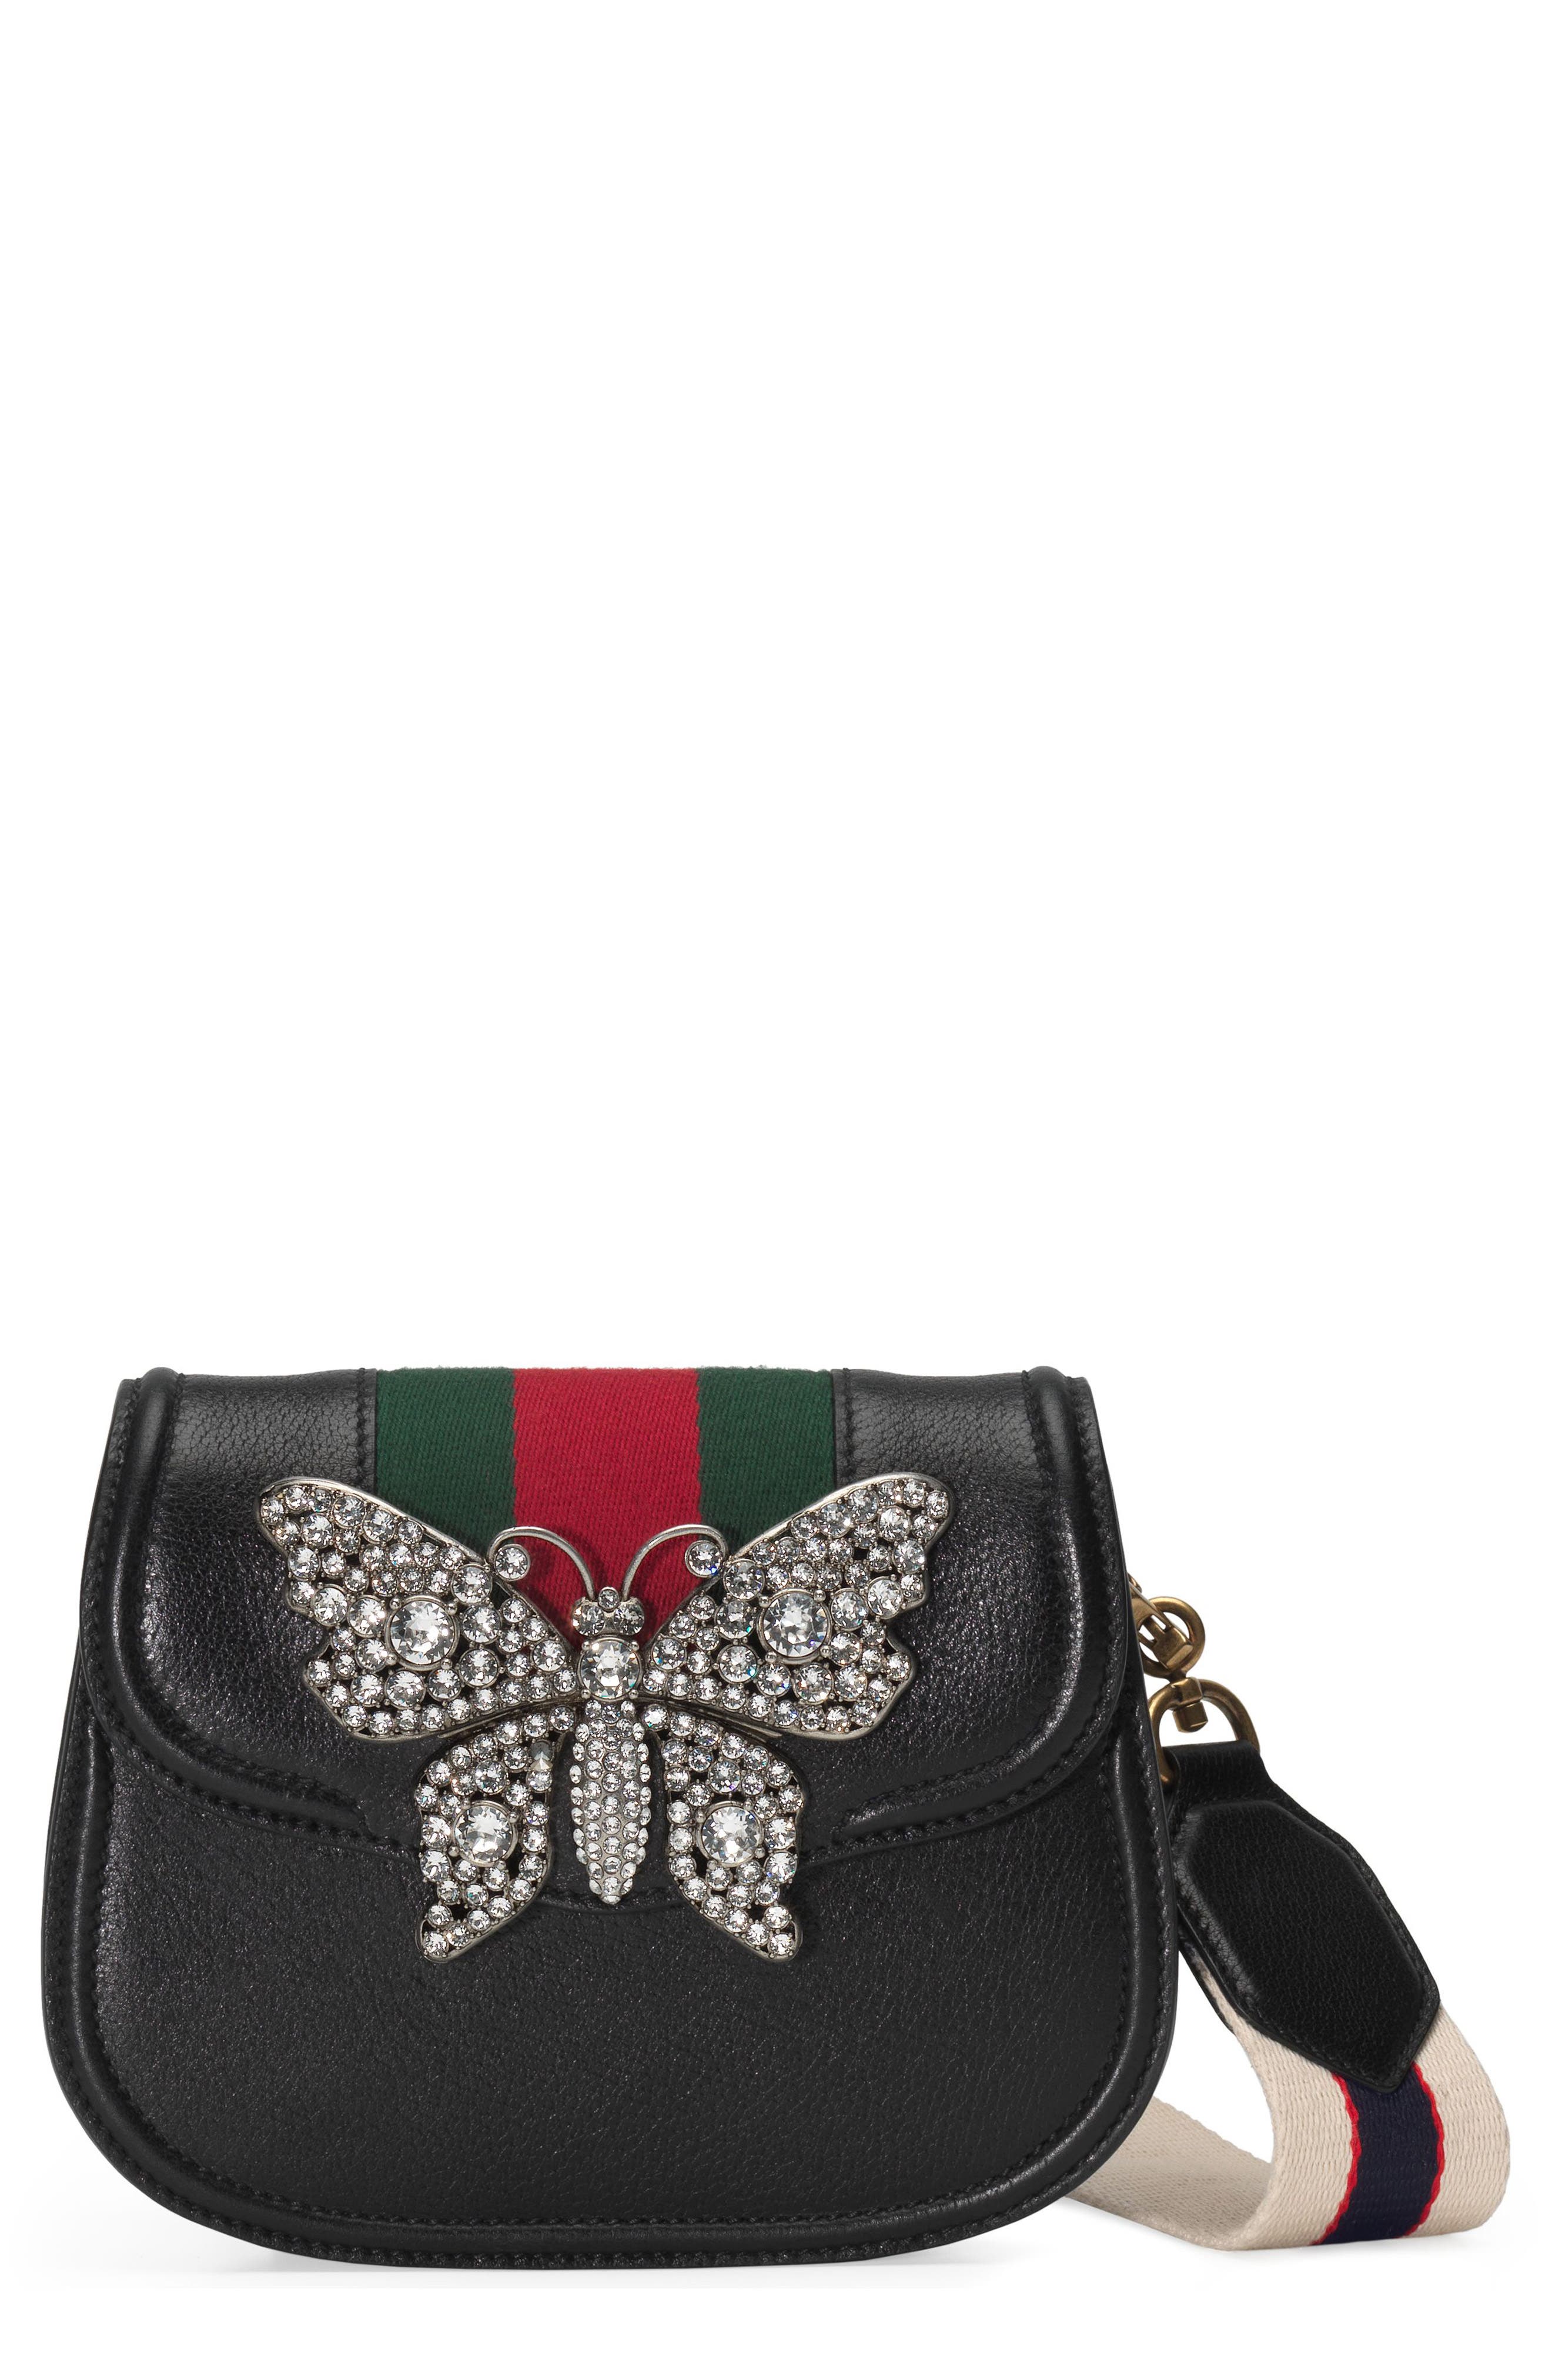 butterfly gucci purse